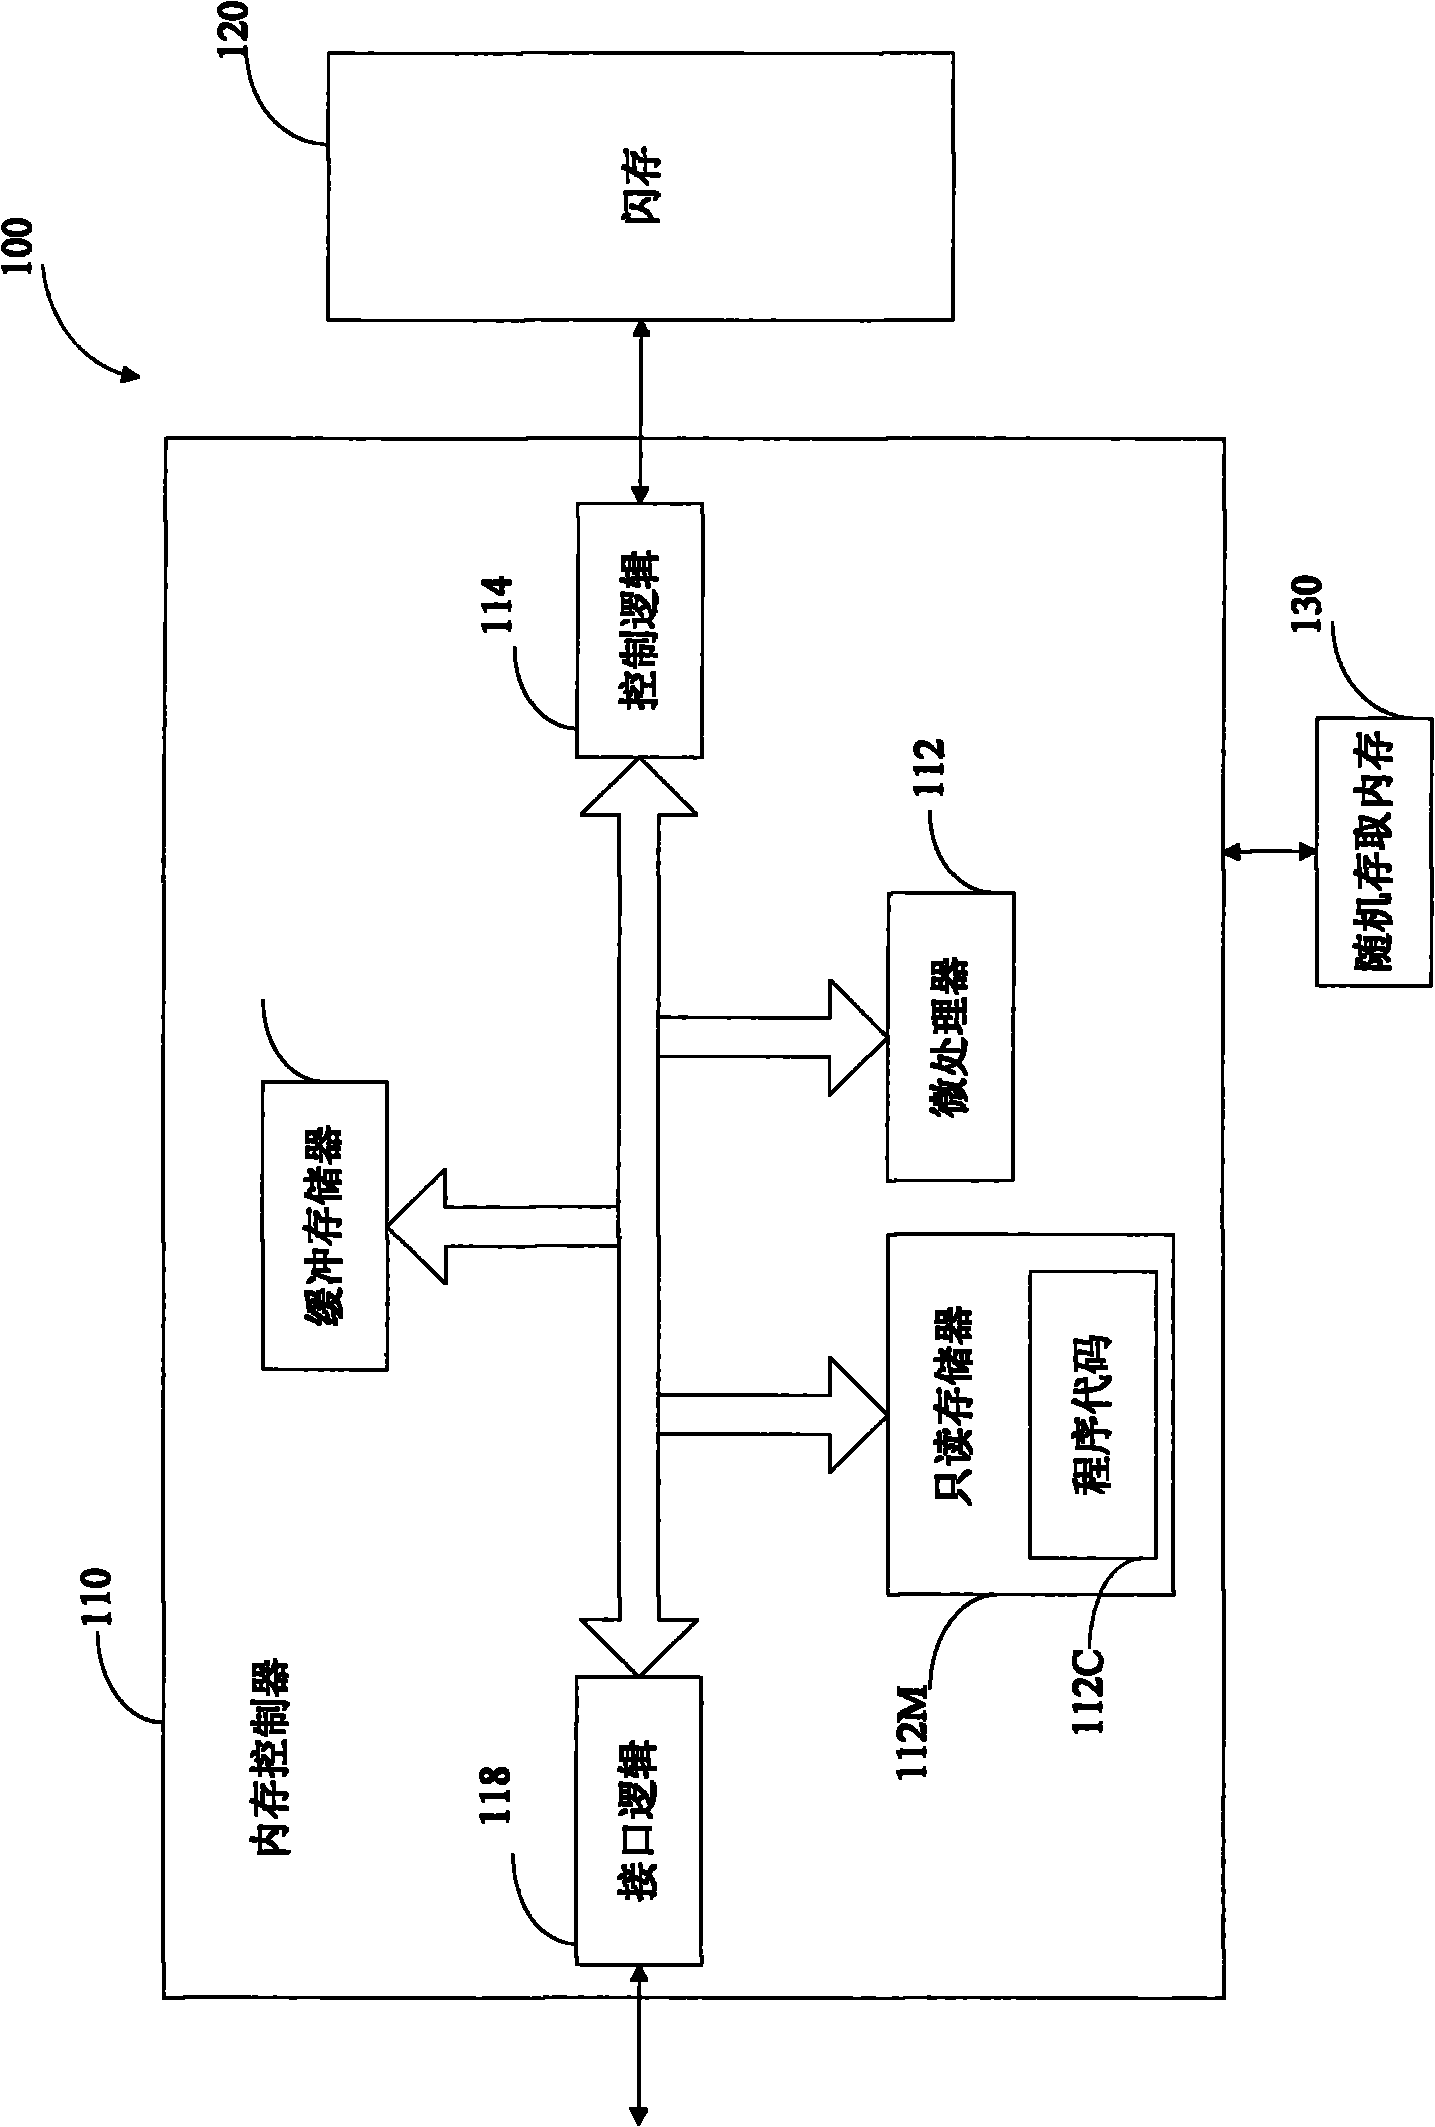 Access method for flash memory, portable memory device and controller thereof